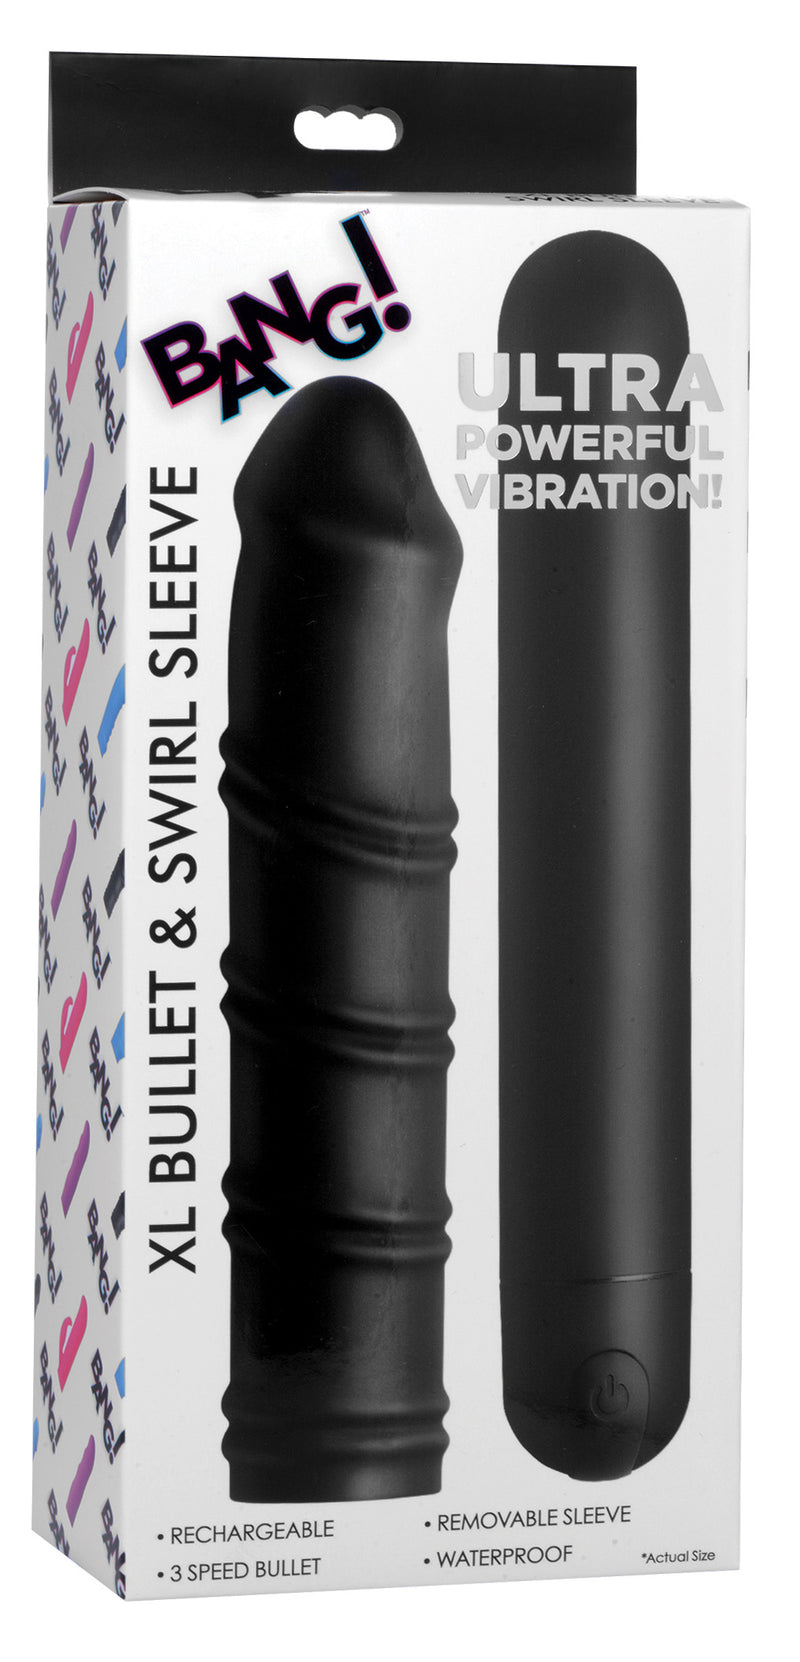 XL Silicone Bullet and Swirl Sleeve vibesextoys from Bang